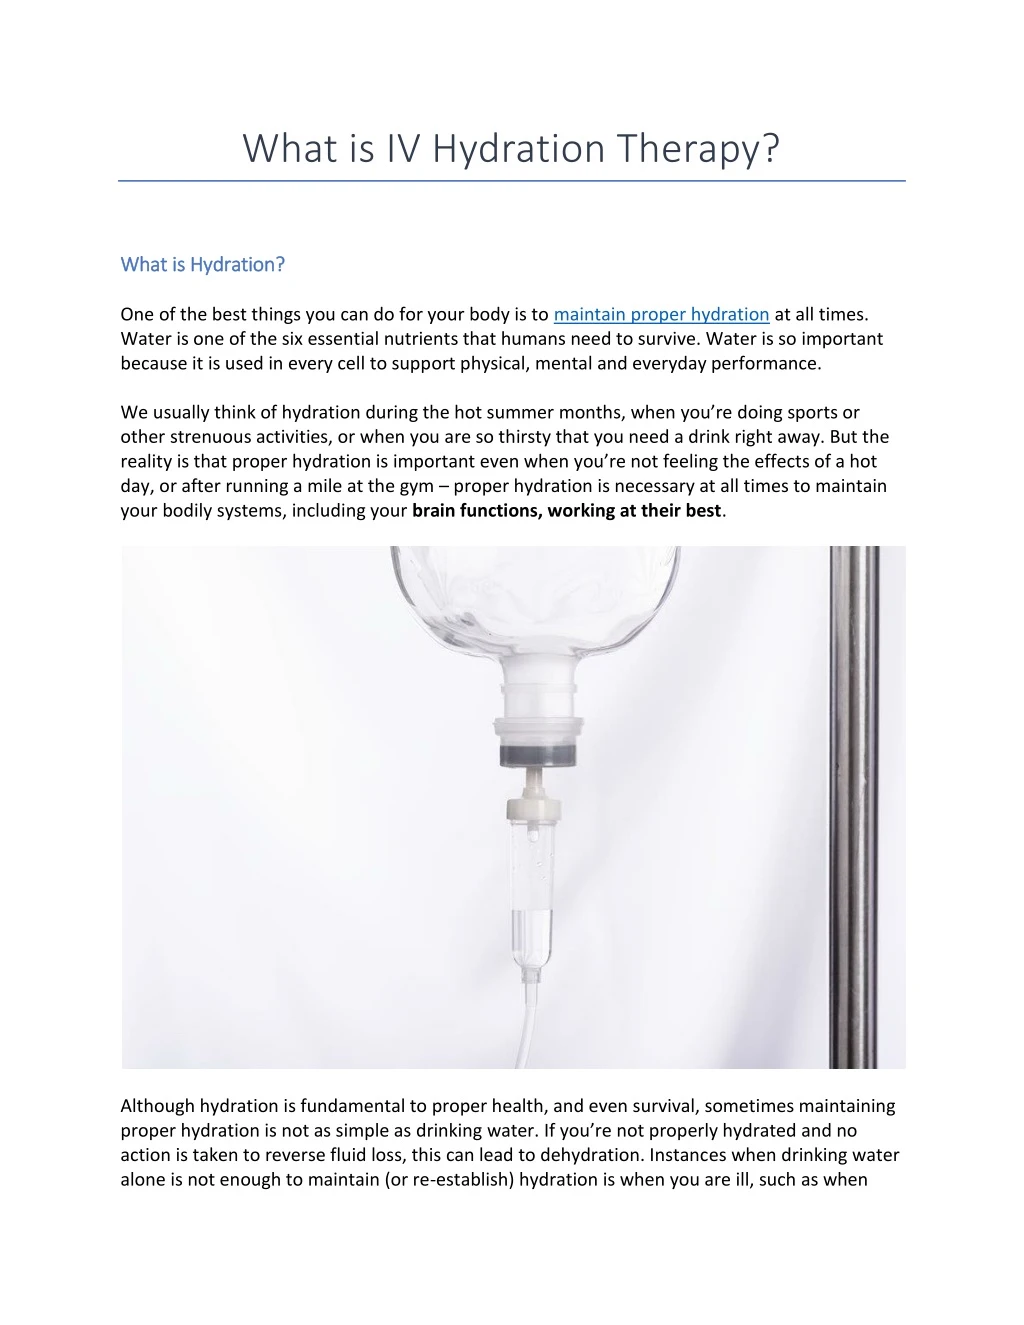 what is iv hydration therapy